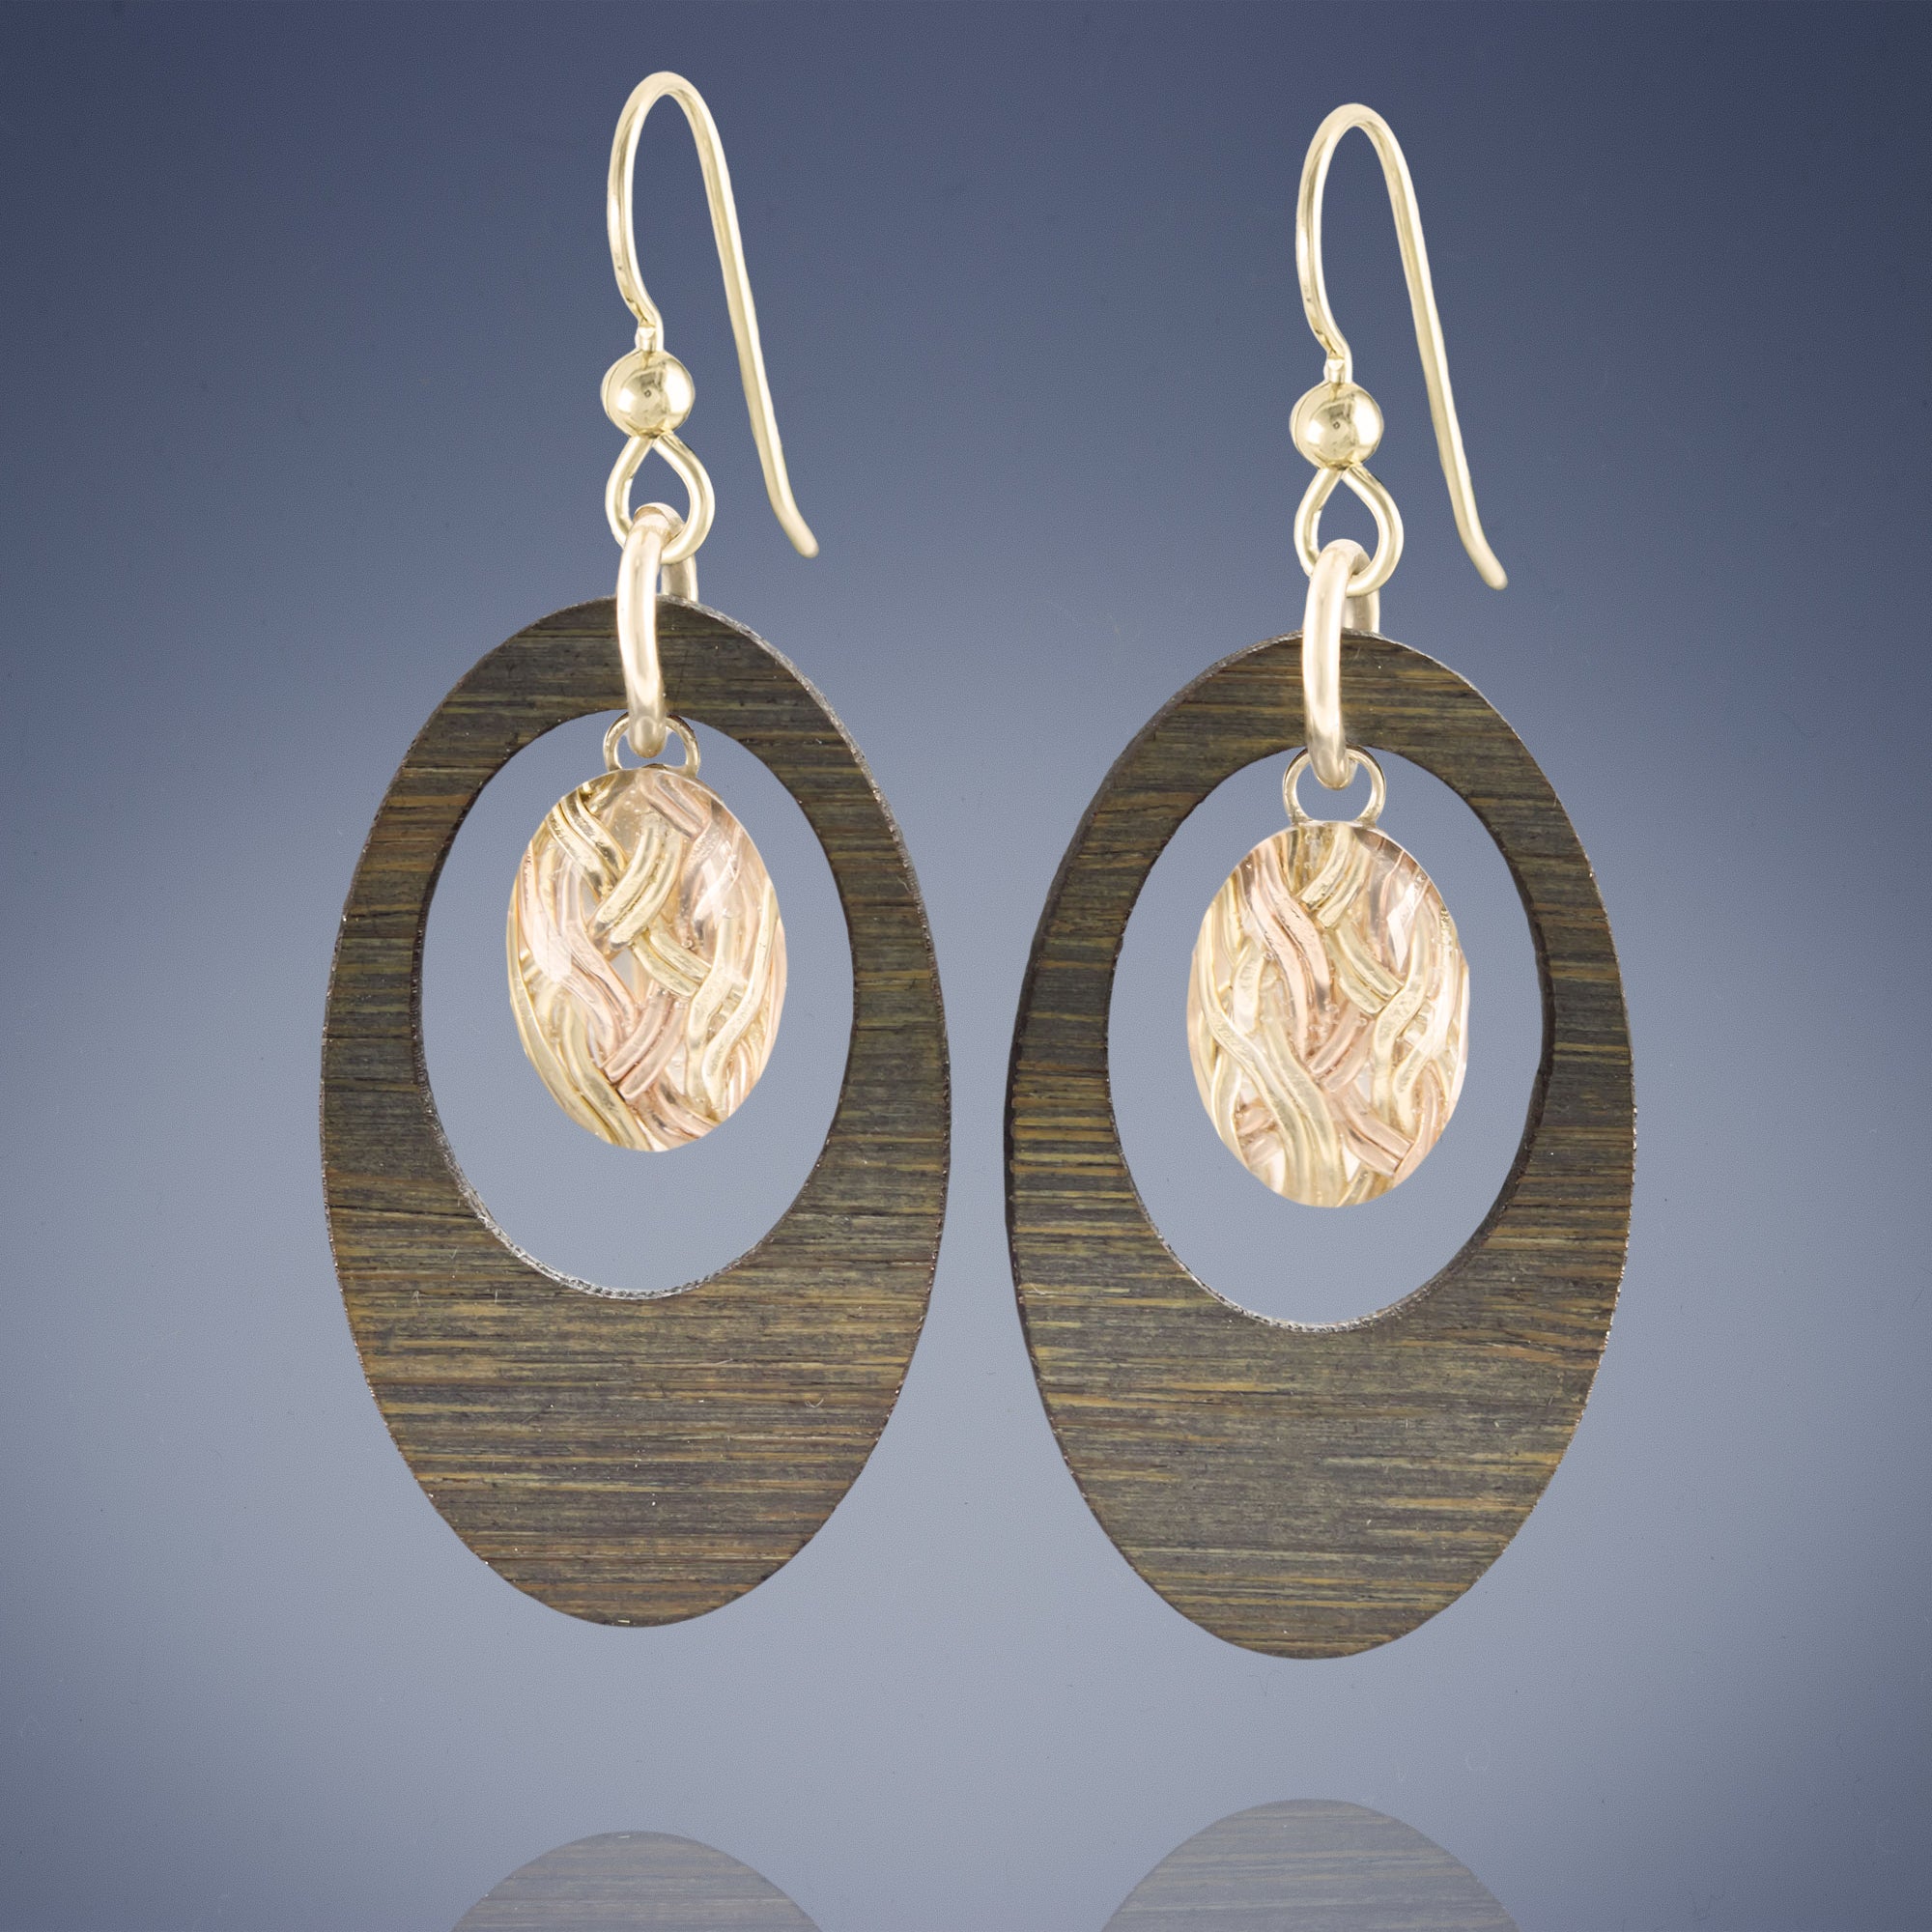 Oval Bamboo Hoop Drop Earrings with 14K Rose and Yellow Gold Fill and Glass